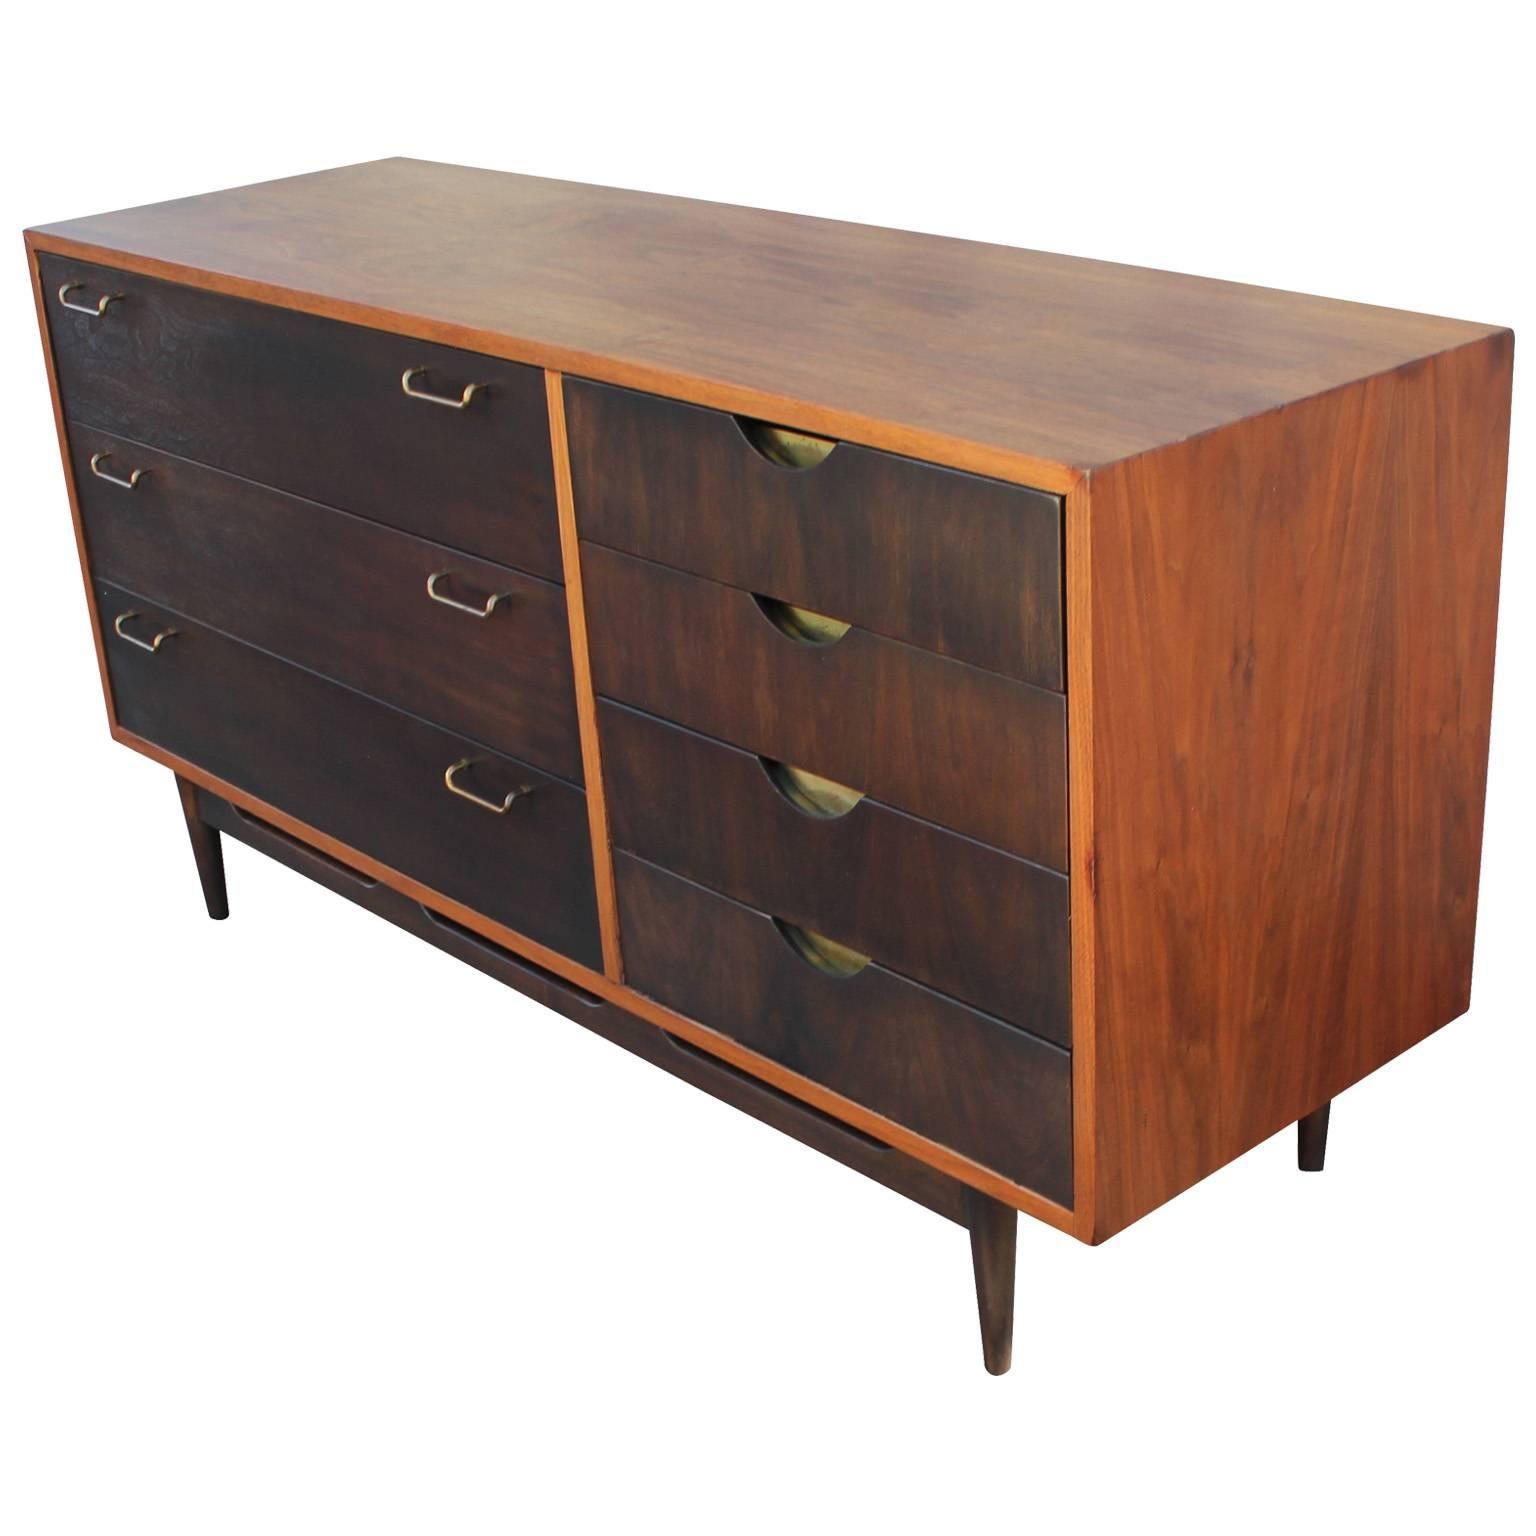 Lovely Two Tone Dresser with Brass Hardware